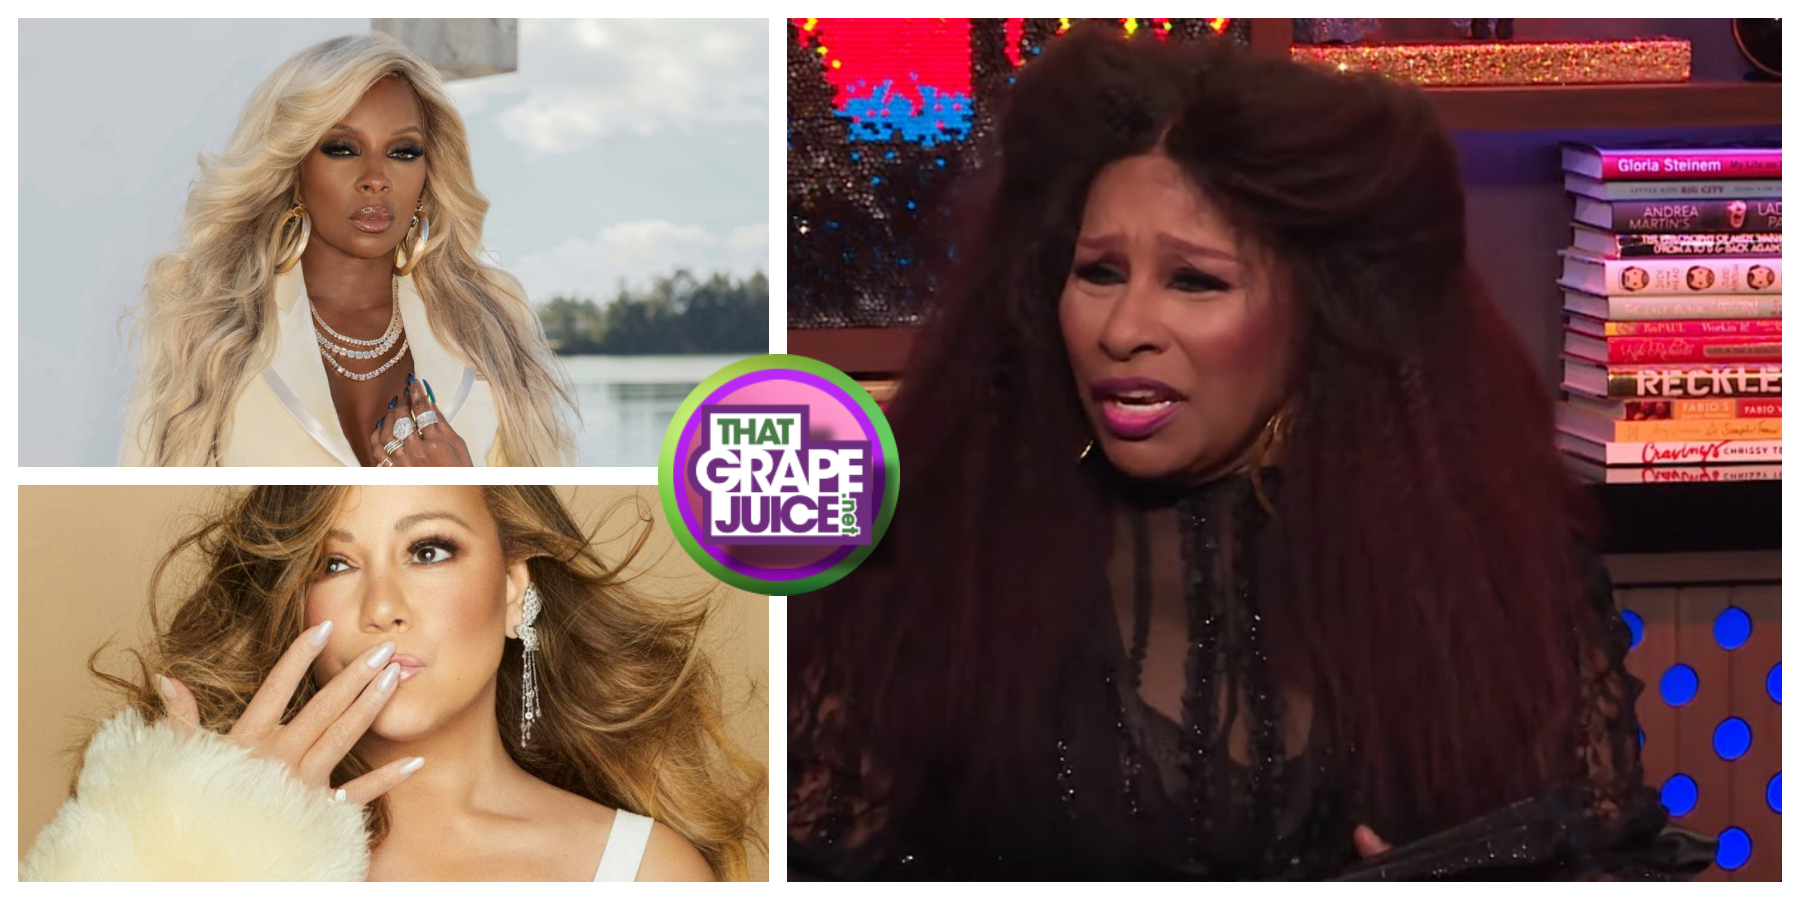 Ouch! Chaka Khan Disses Mariah Carey & Mary J. Blige Over “Greatest Singer” List: “[Rolling Stone] Needs Hearing Aids”